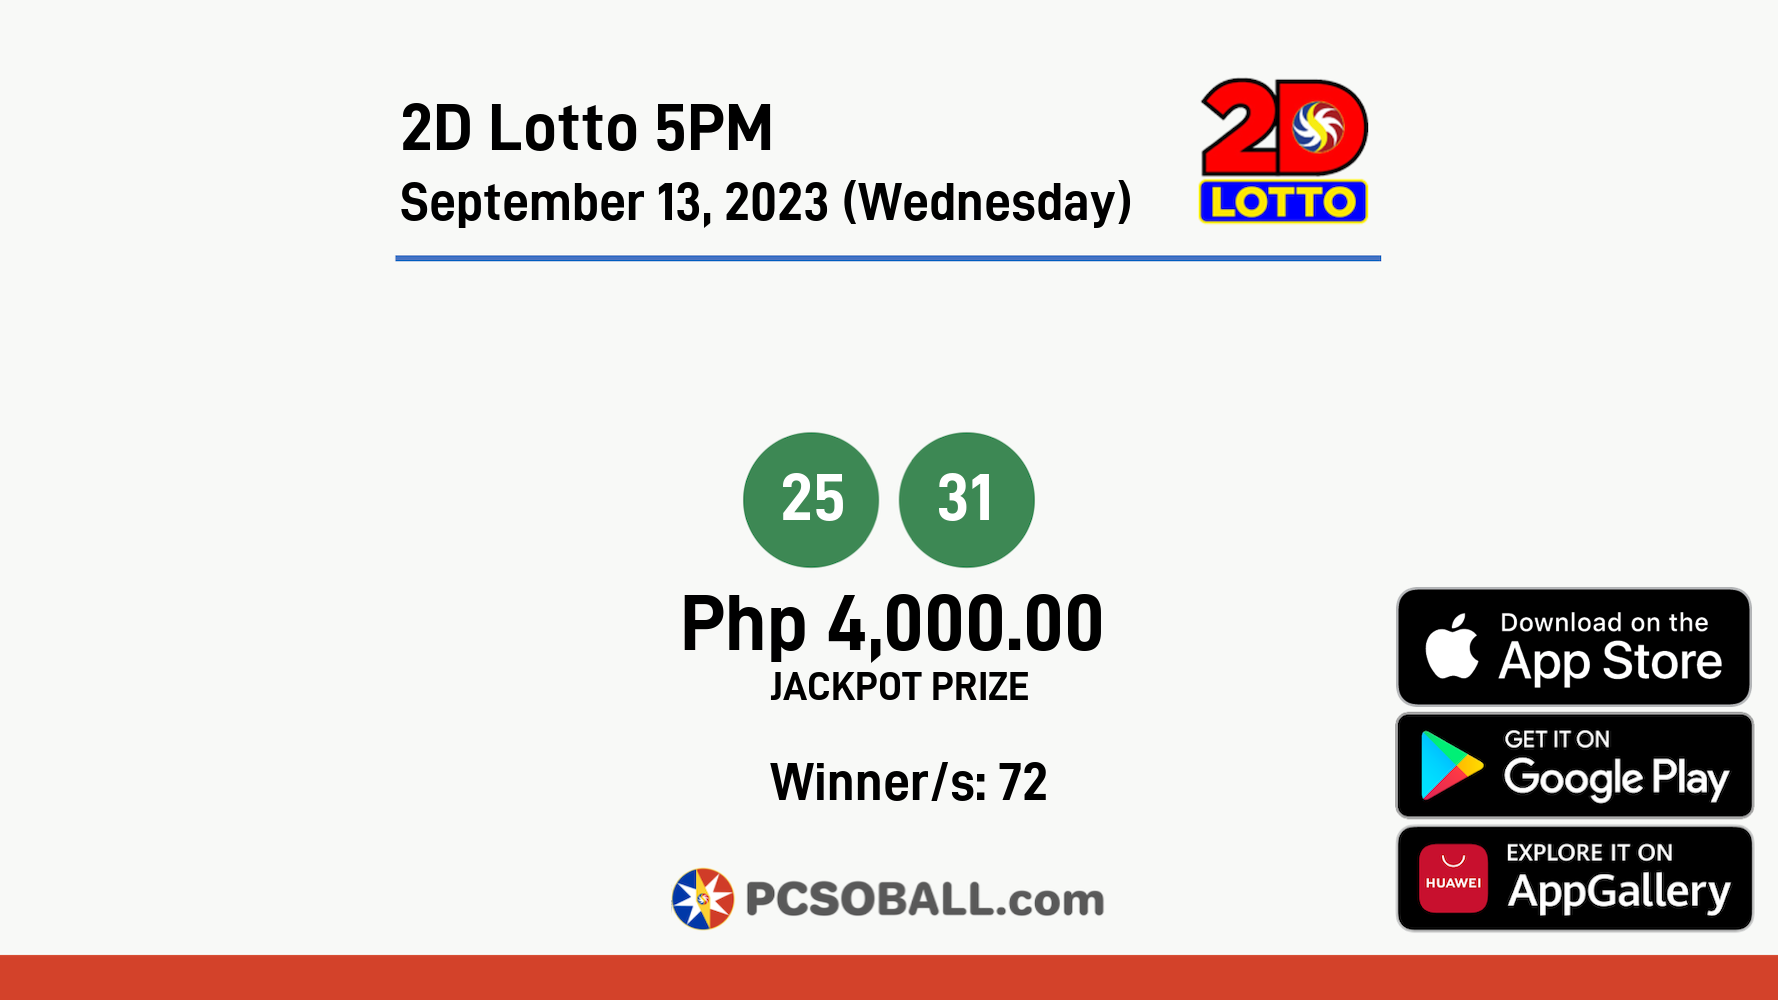 2D Lotto 5PM September 13, 2023 (Wednesday) Result